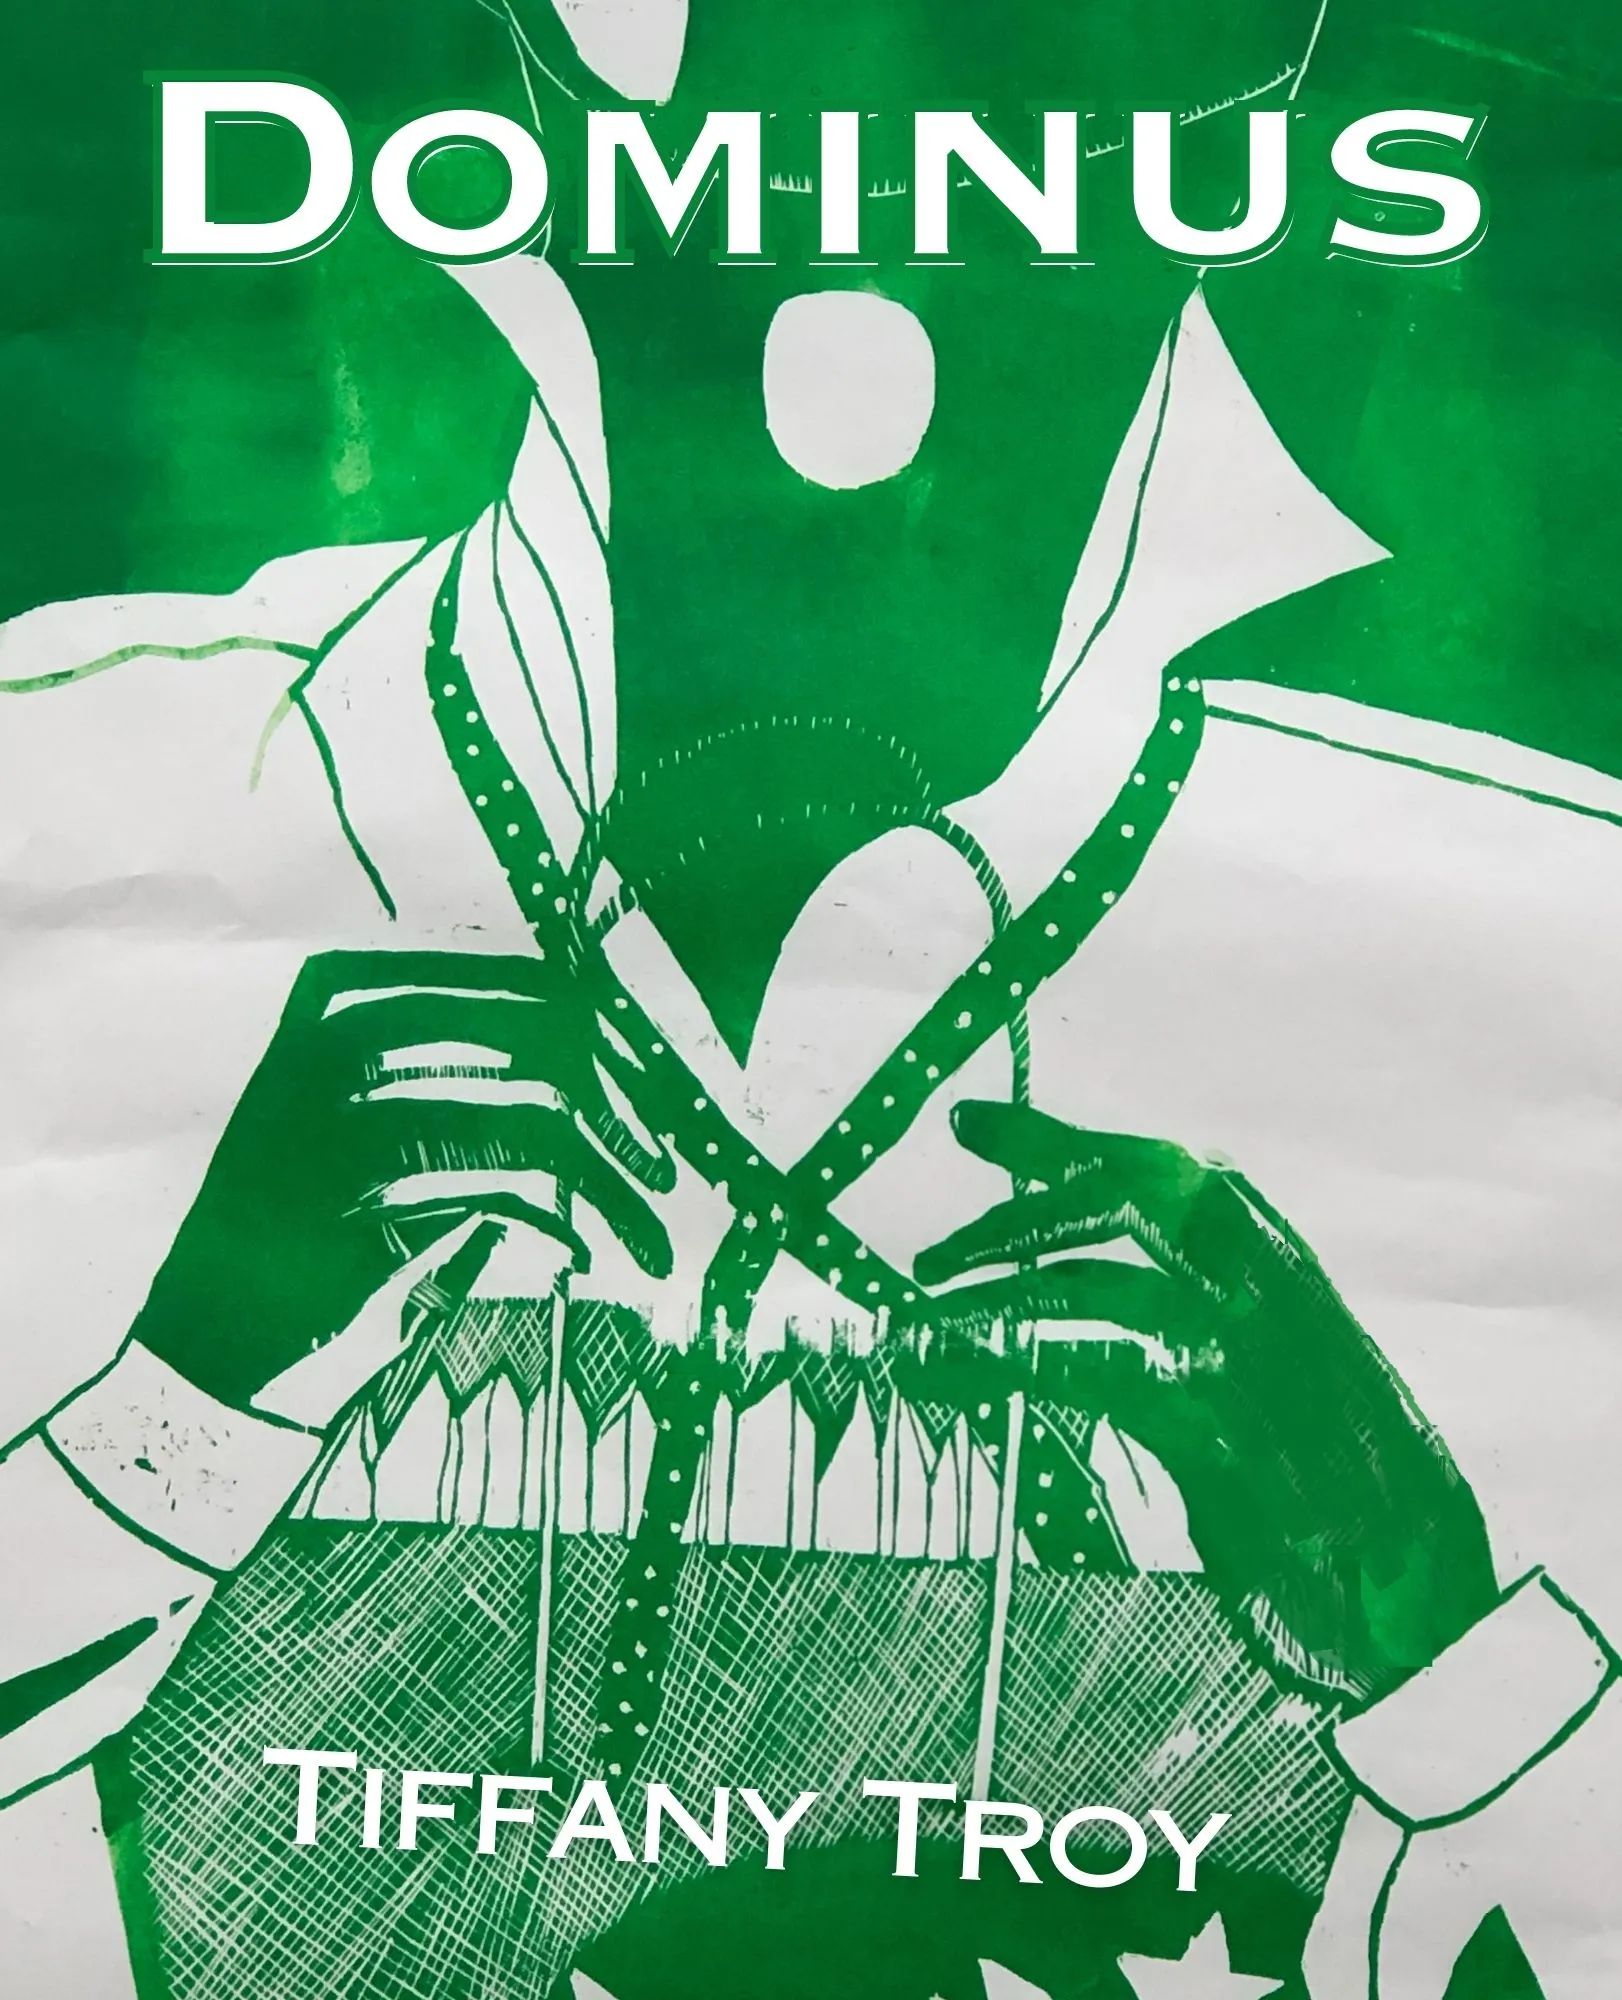 Dominus by Tiffany Troy Bookcover